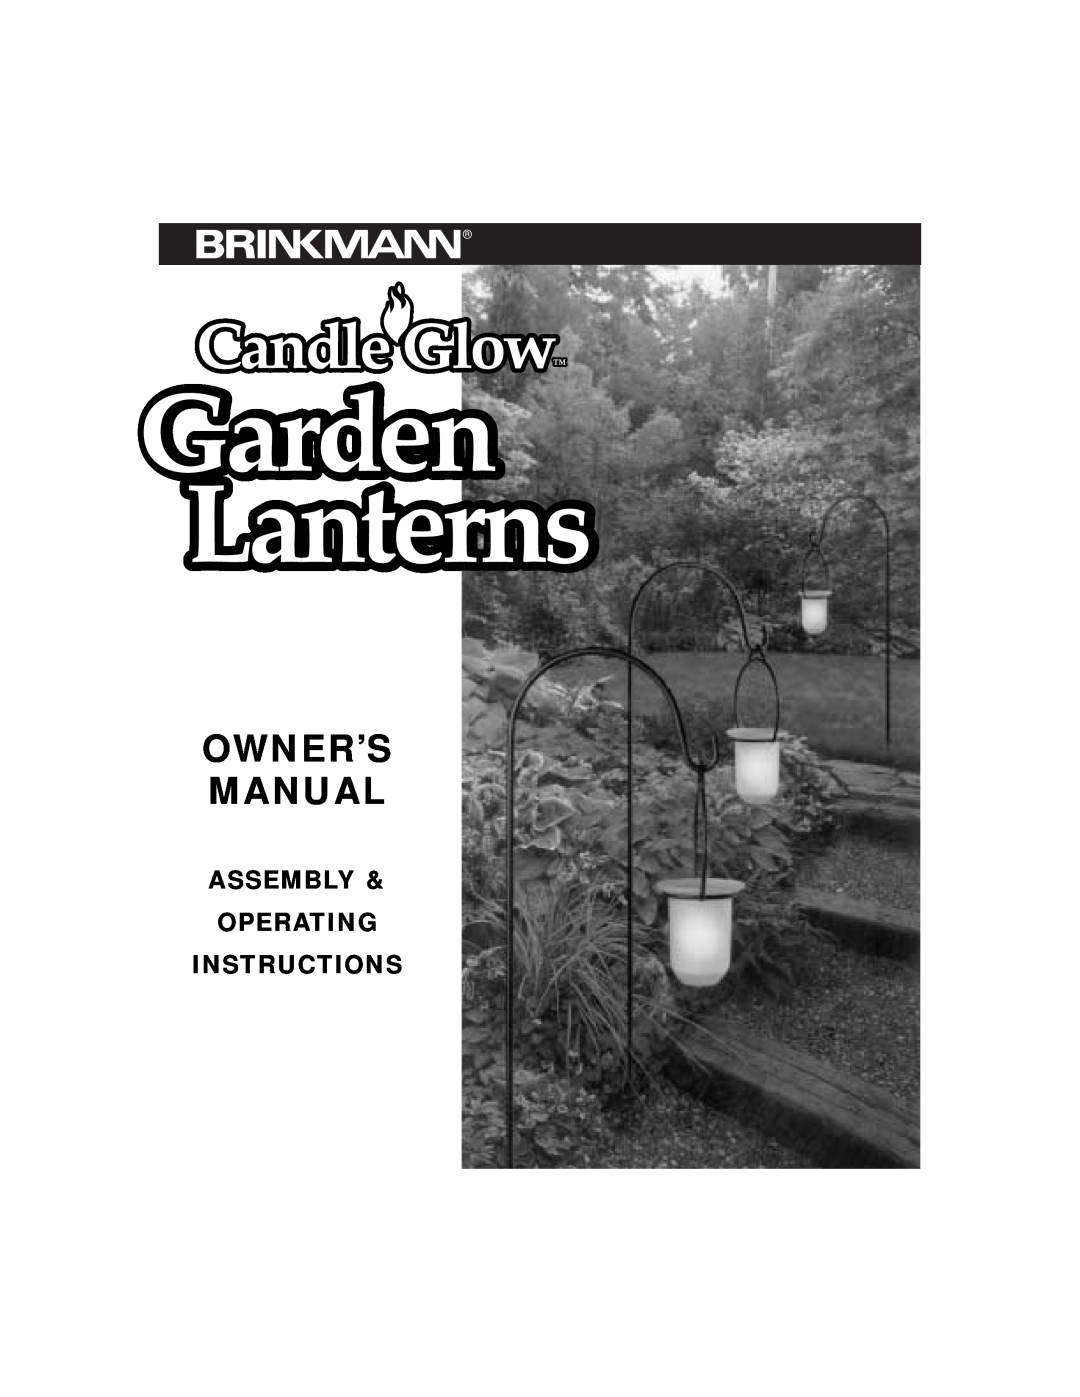 Brinkmann Candle Glow Garden Lanterns owner manual Assembly Operating Instructions 